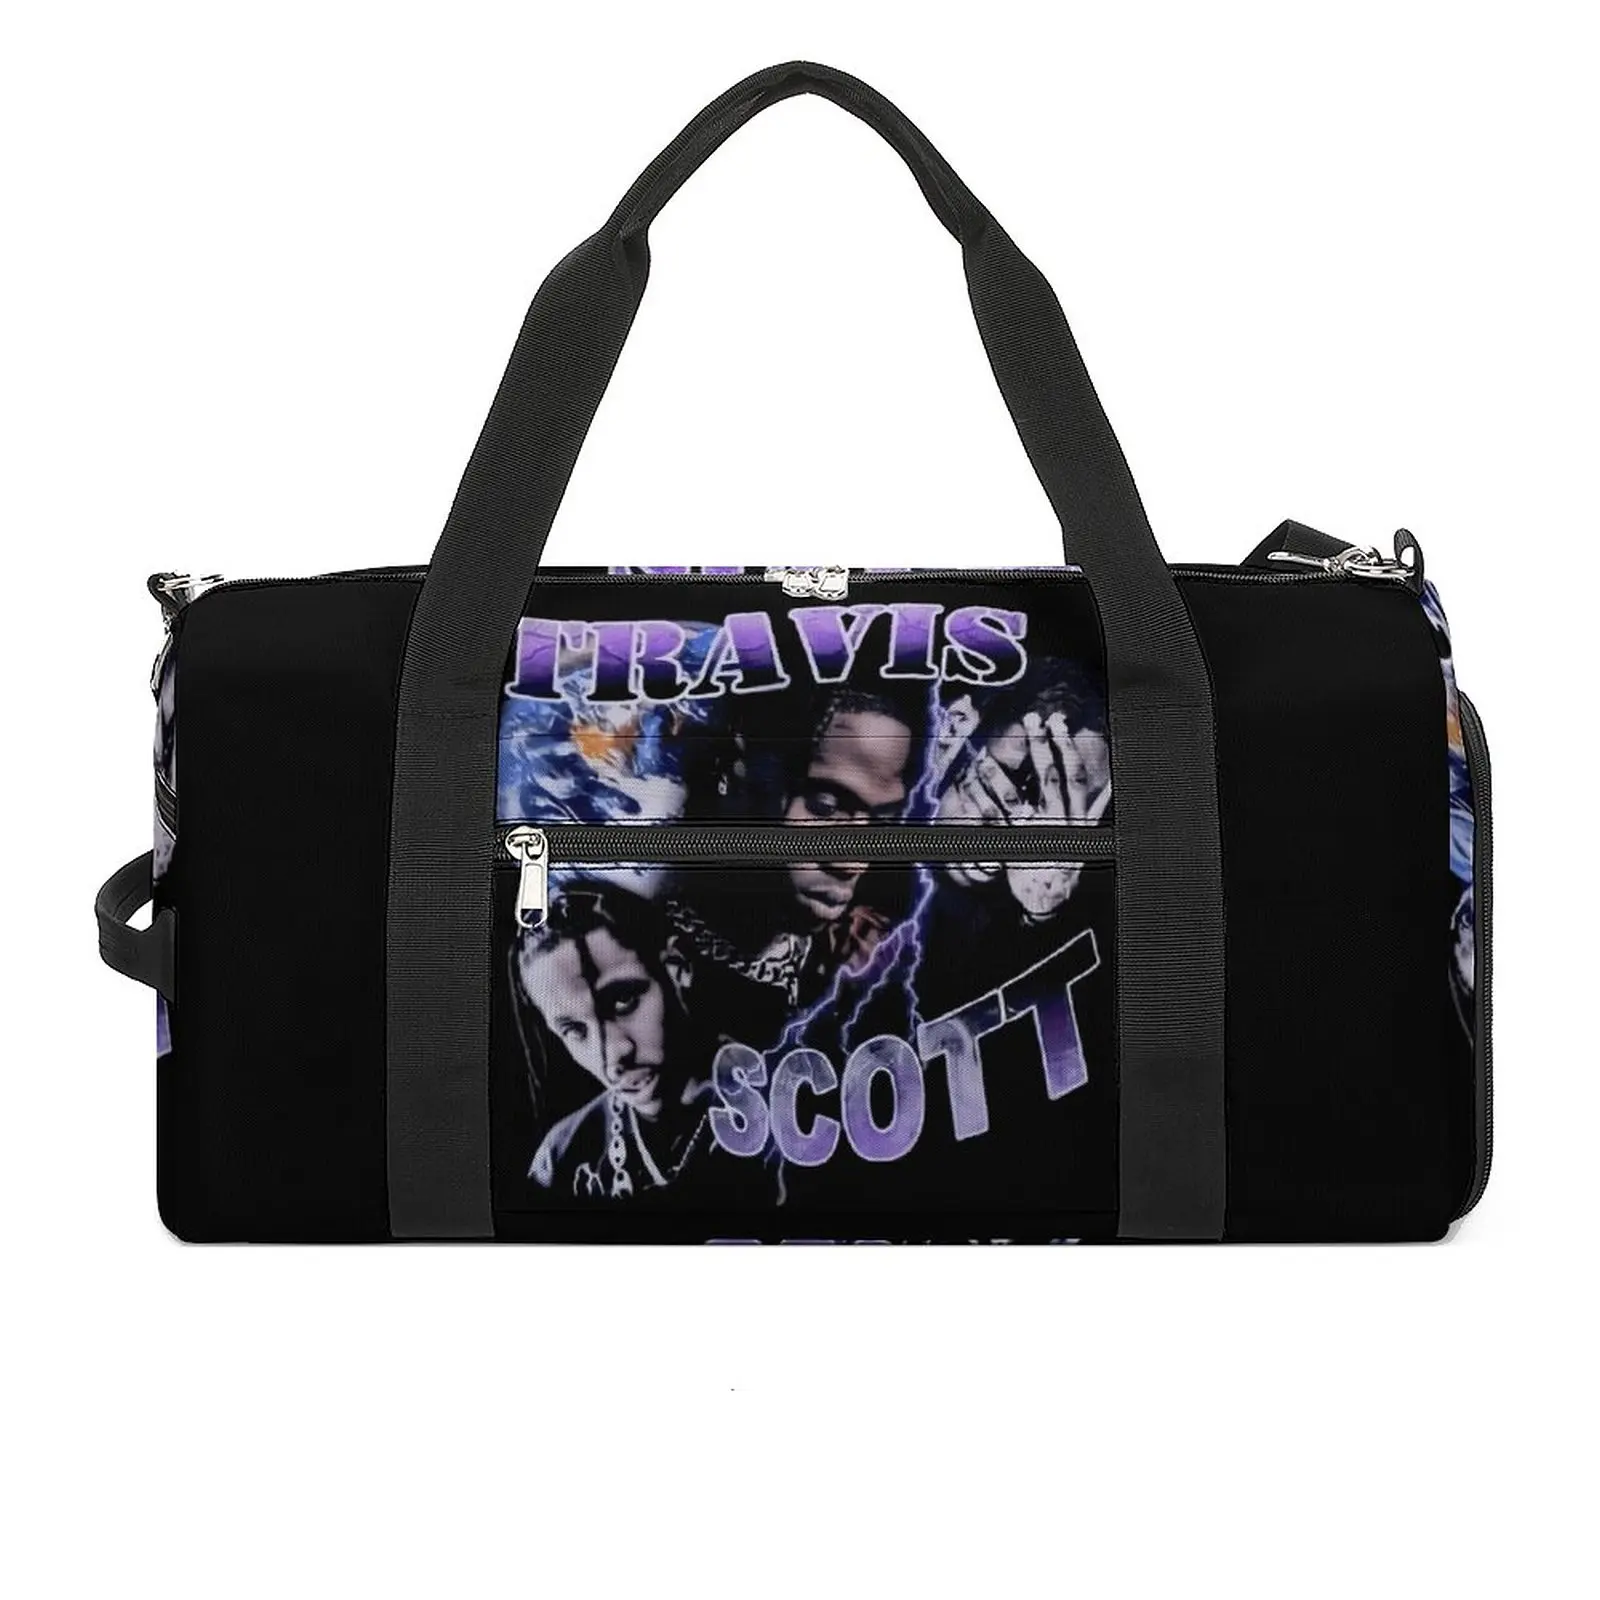 

T-Travis S-Scott Gym Bag American Rapper Luggage Sports Bags Men Women Printed with Shoes Vintage Fitness Bag Oxford Handbags